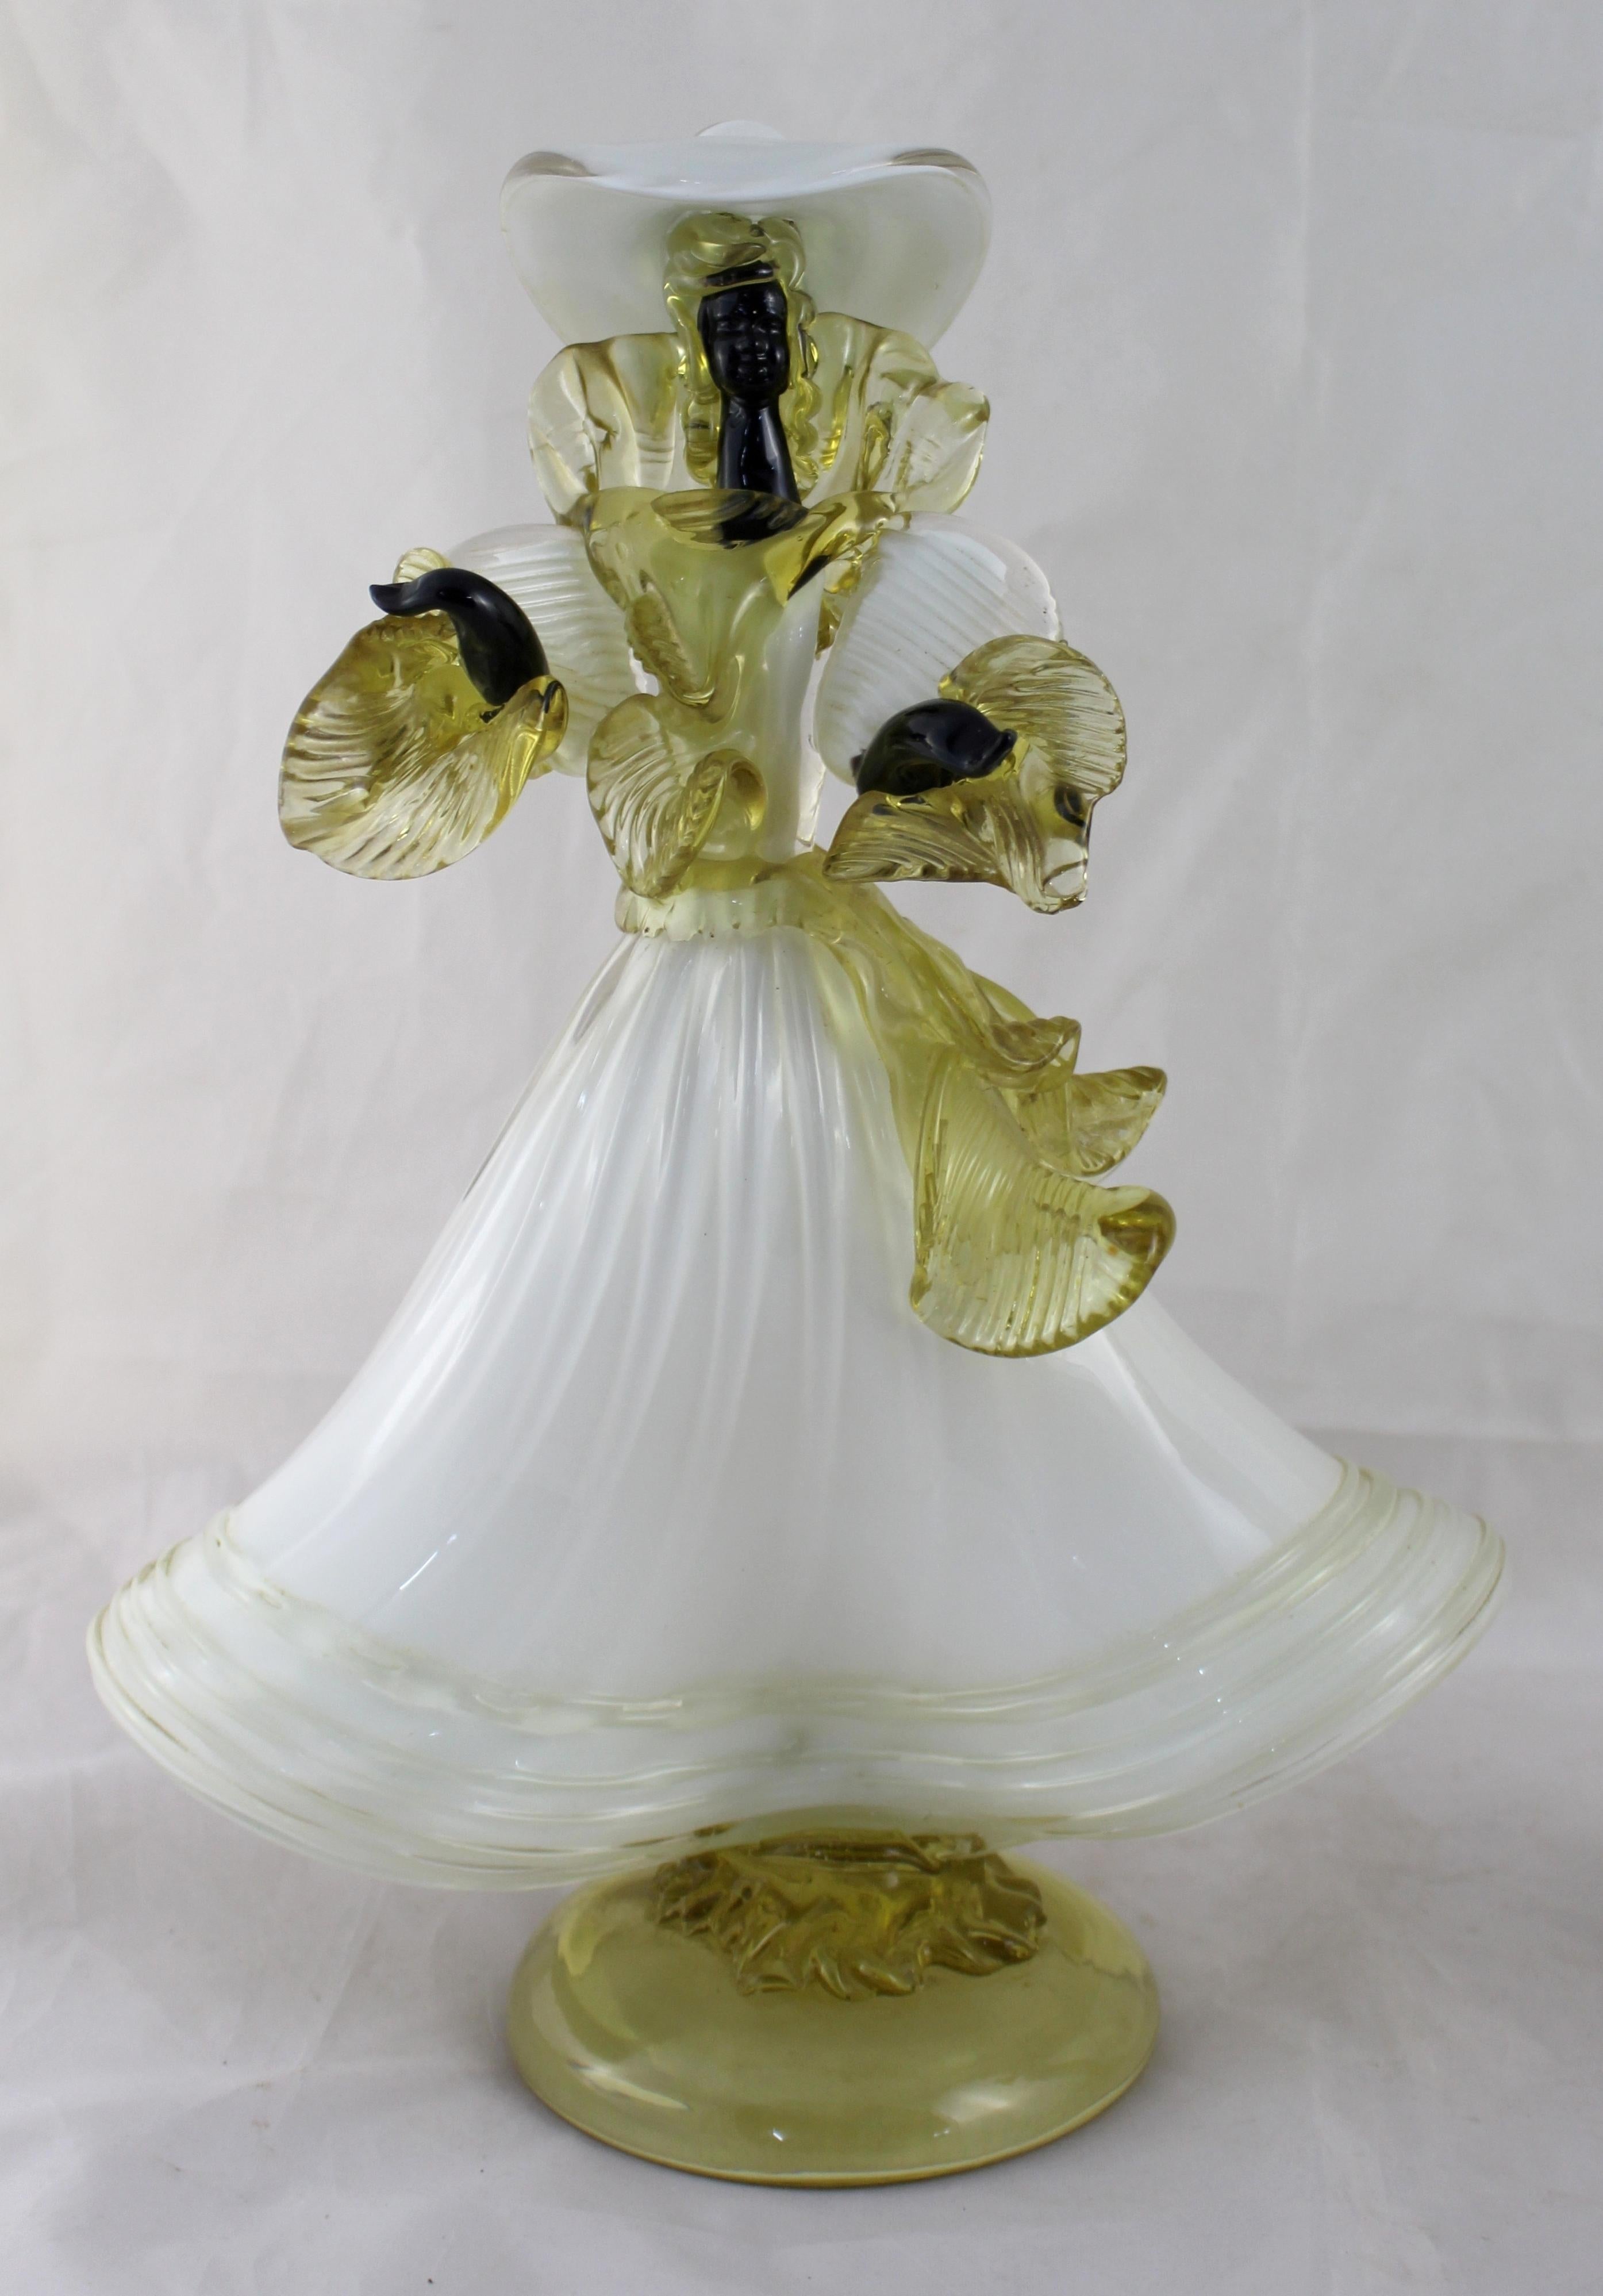 Period: Mid-late 20th century.
Origin: Murano, Italy
Artist: Cesare Toffolo, signed to the base of each figure
Measures: Height 36 cm (14 in) and 37 cm (14 1/2 in)
Condition: Very good condition commensurate with age.

Offered for sale a lovely